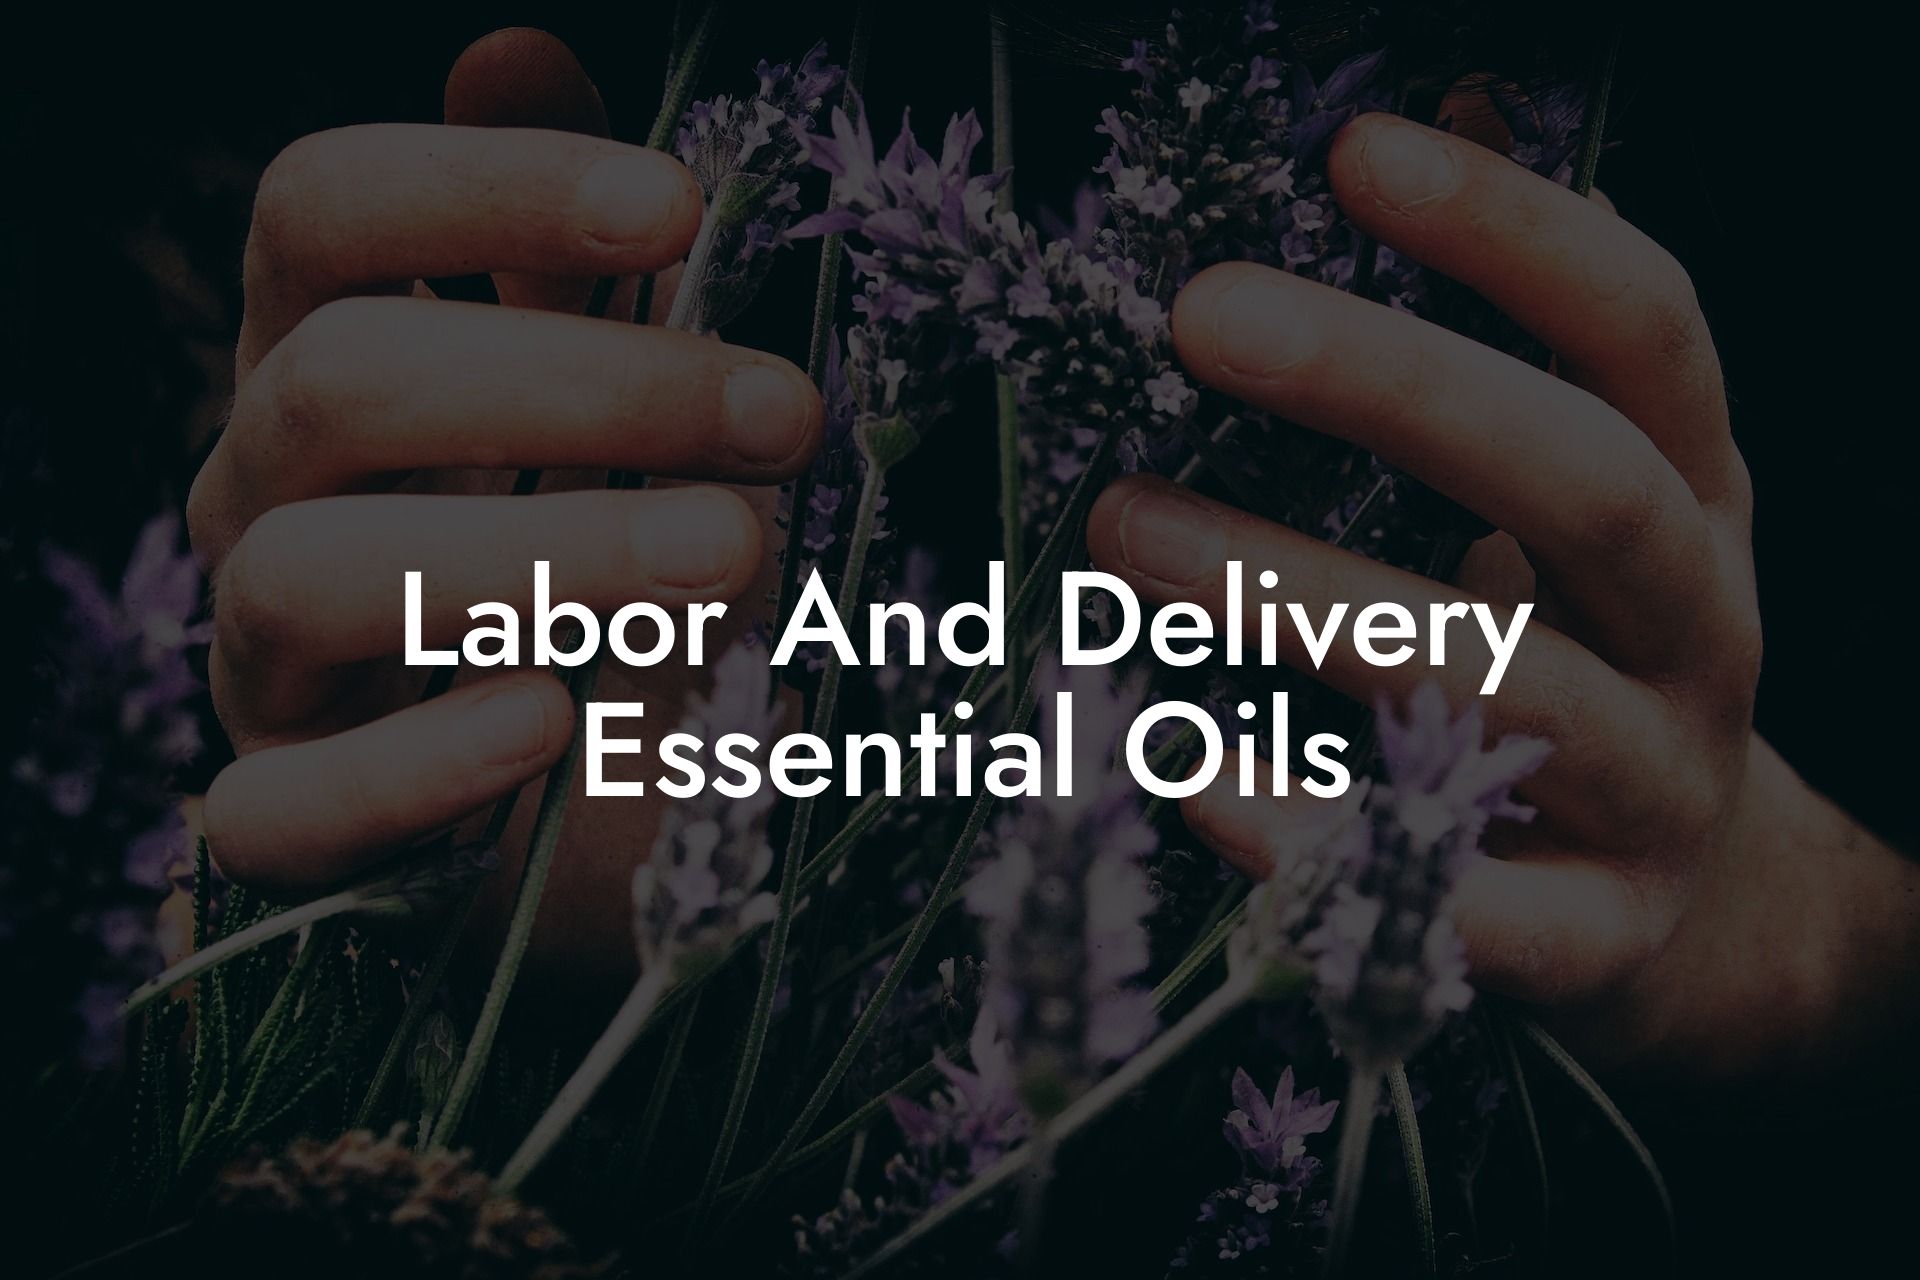 Labor And Delivery Essential Oils